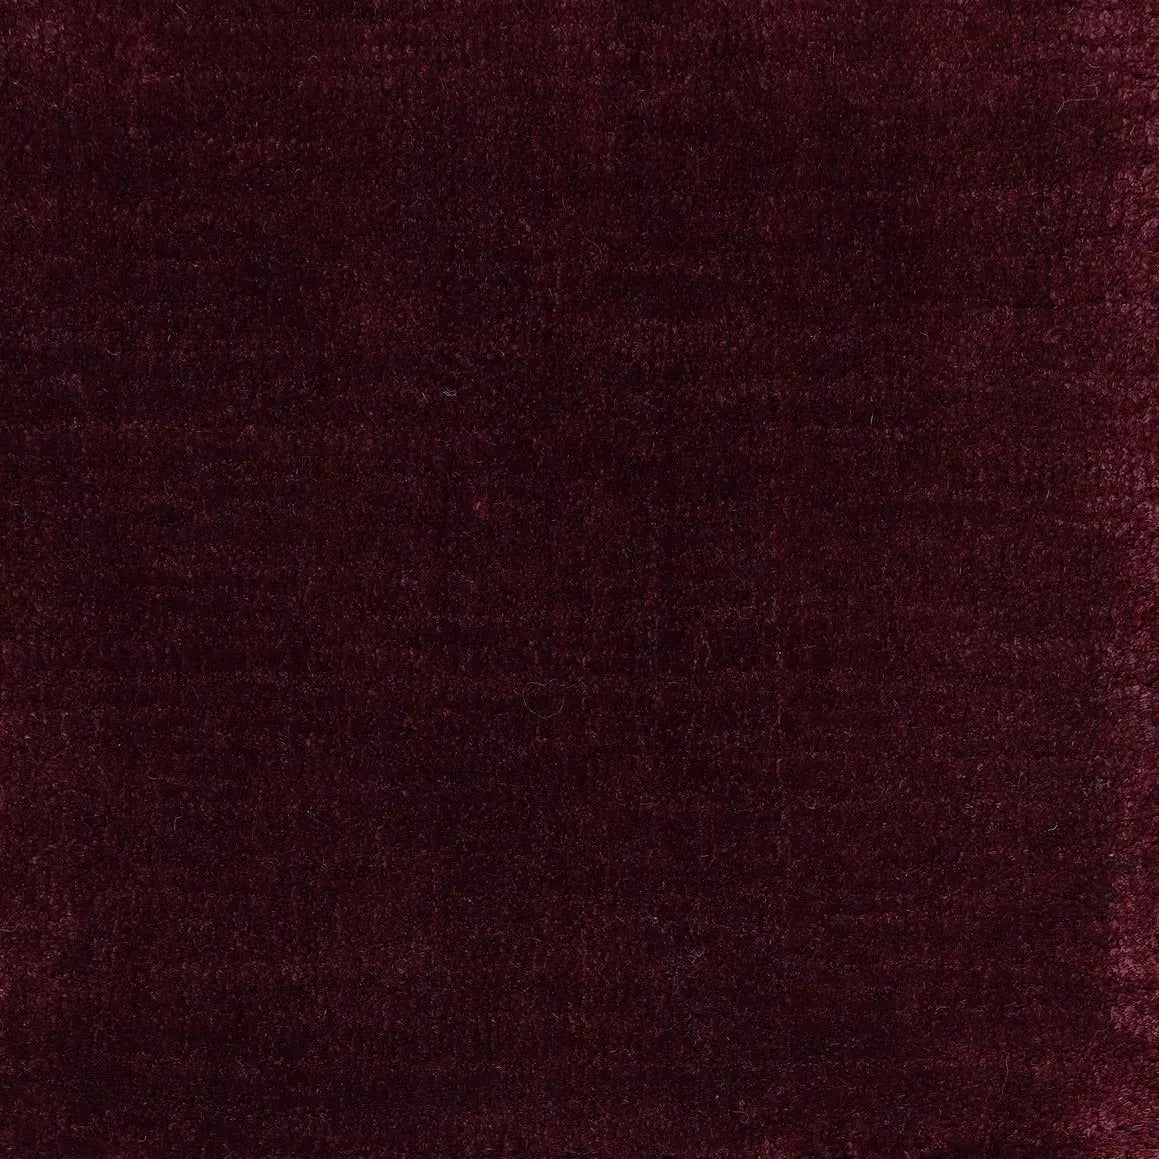 Bamboo Silk and Wool Blend Bordeaux Sample